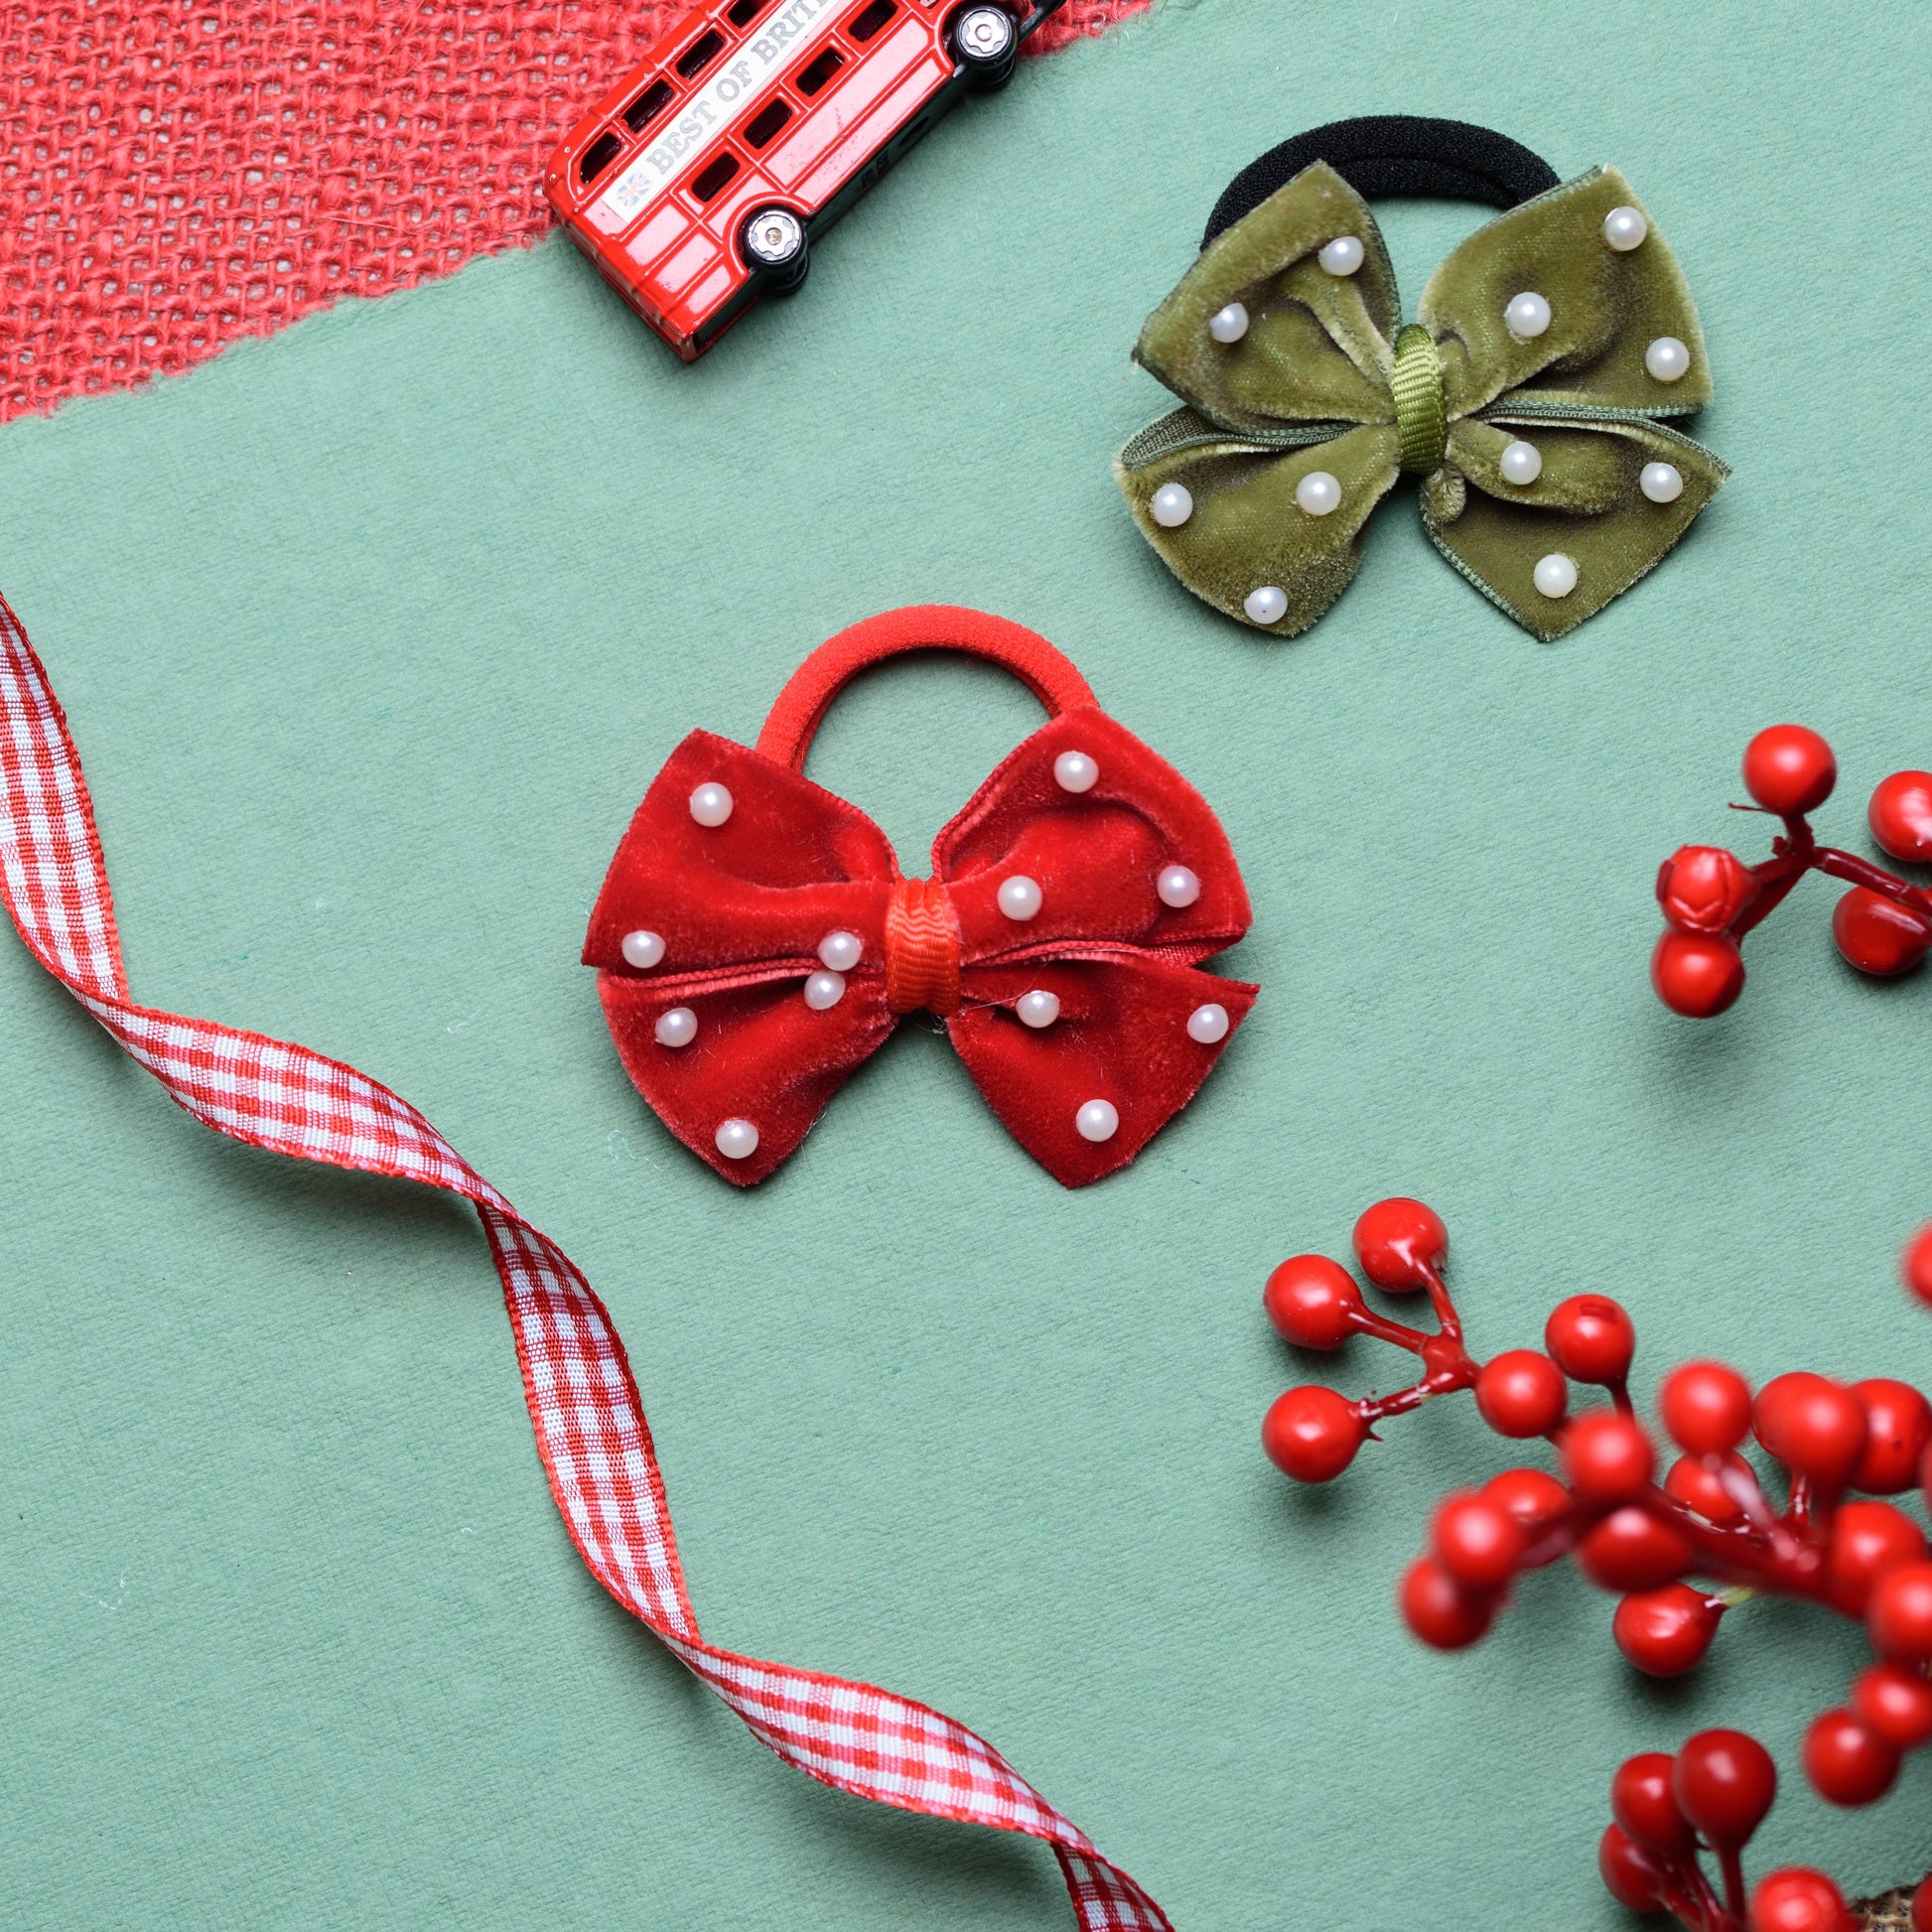 Bow on rubber band with pearls -  Red and Green